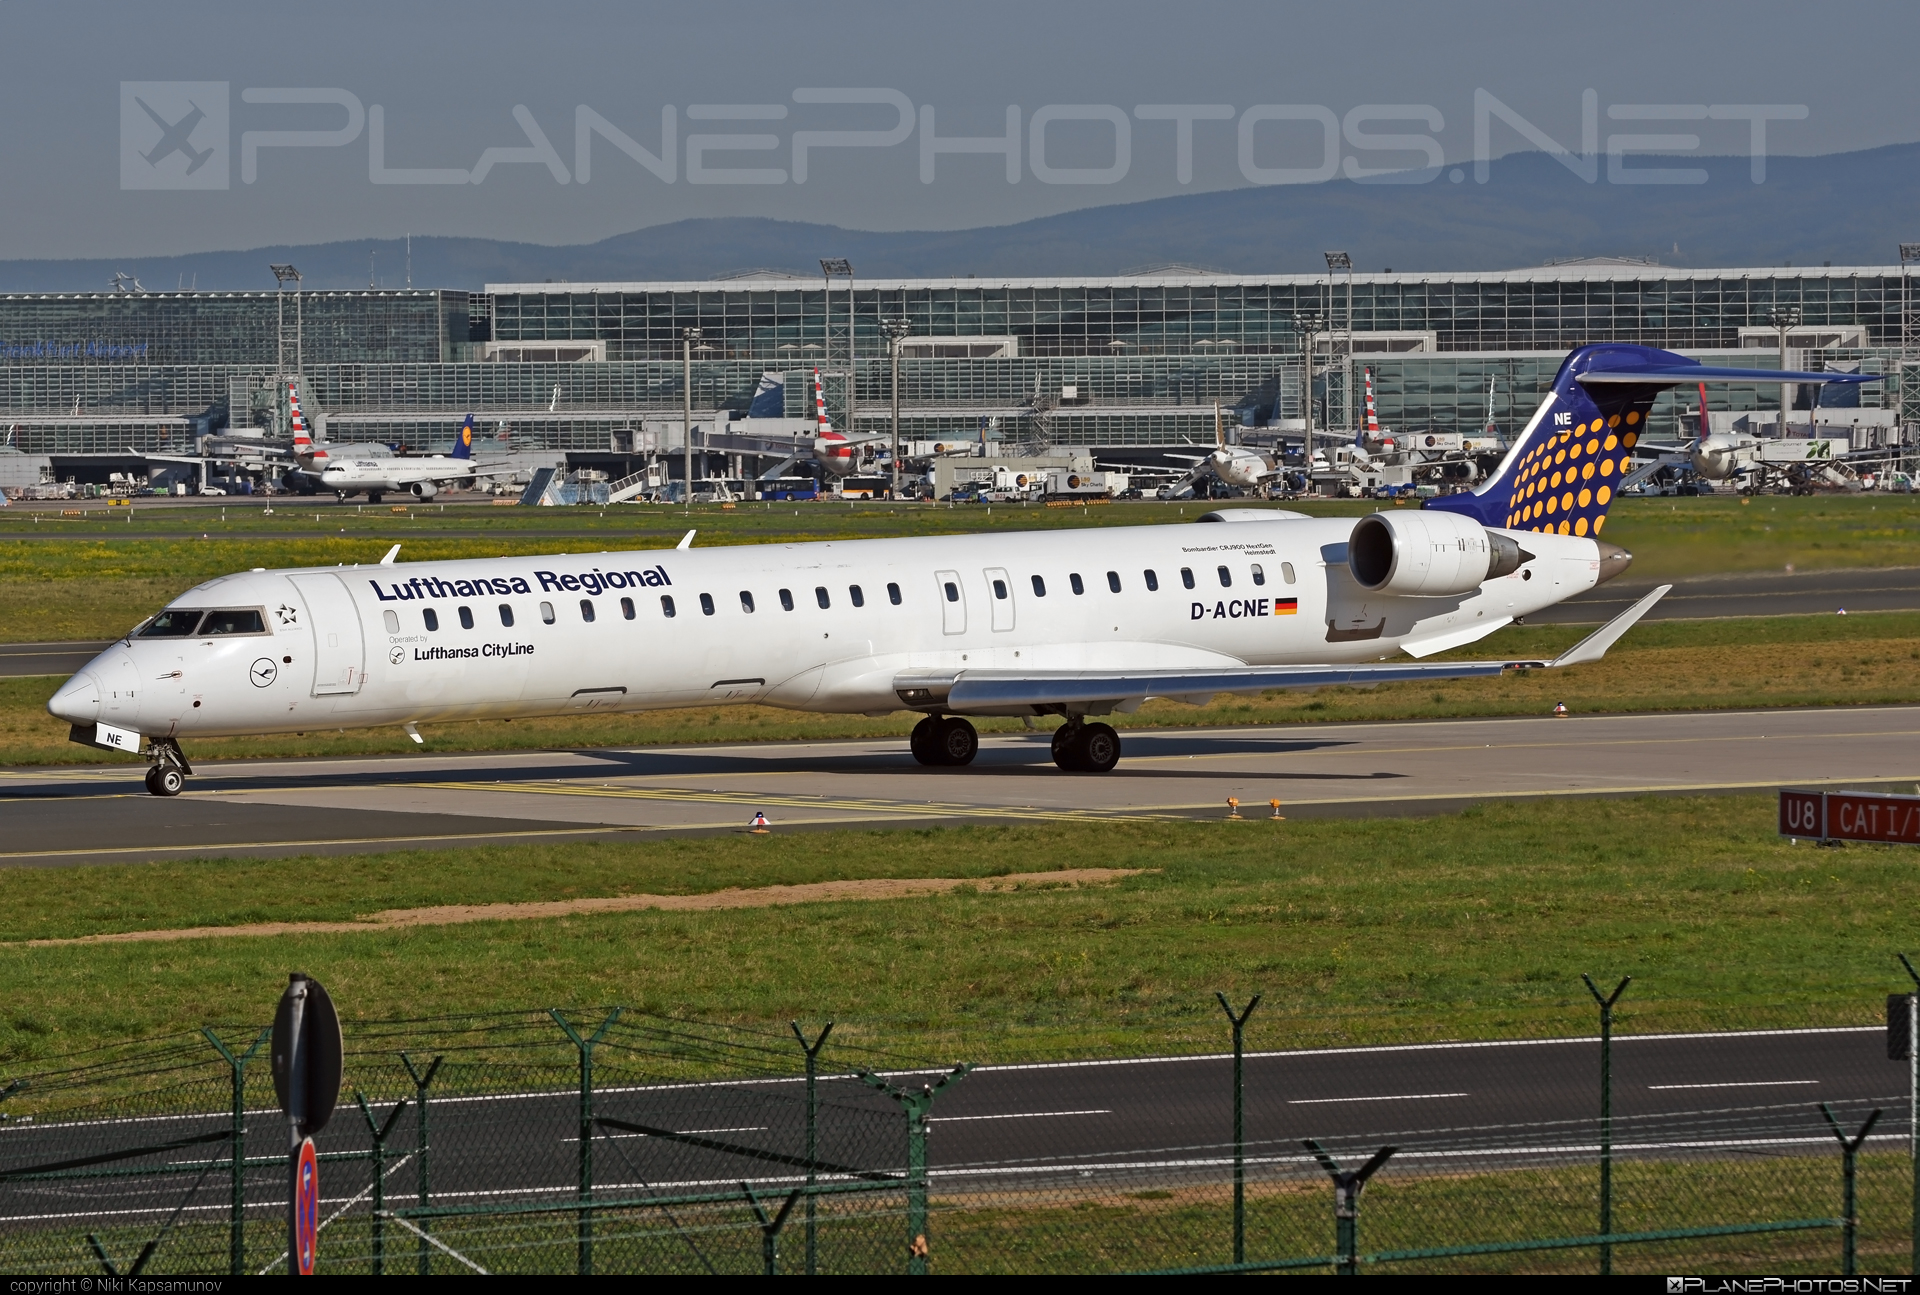 Bombardier CRJ900 - D-ACNE operated by Lufthansa CityLine #bombardier #crj900 #lufthansa #lufthansacityline